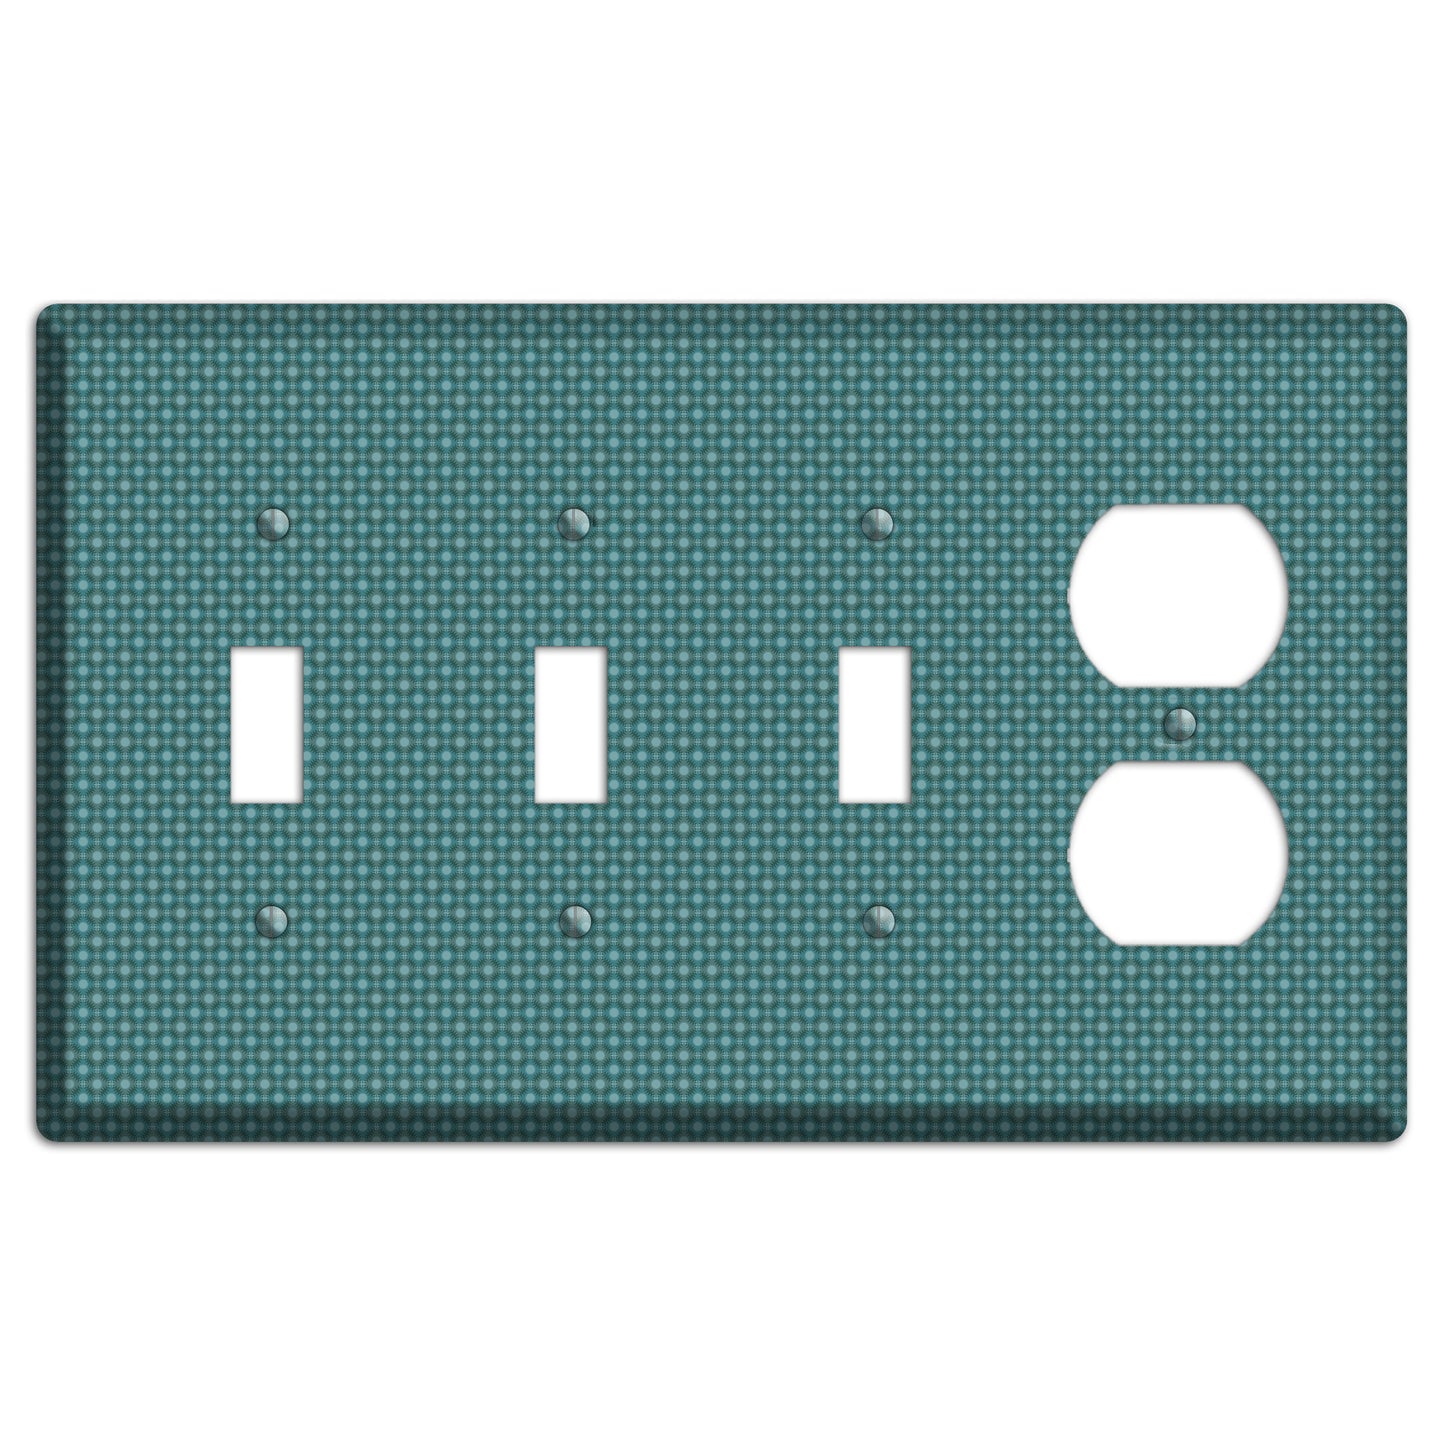 Multi Turquoise Checkered Concentric Circles 3 Toggle / Duplex Wallplate